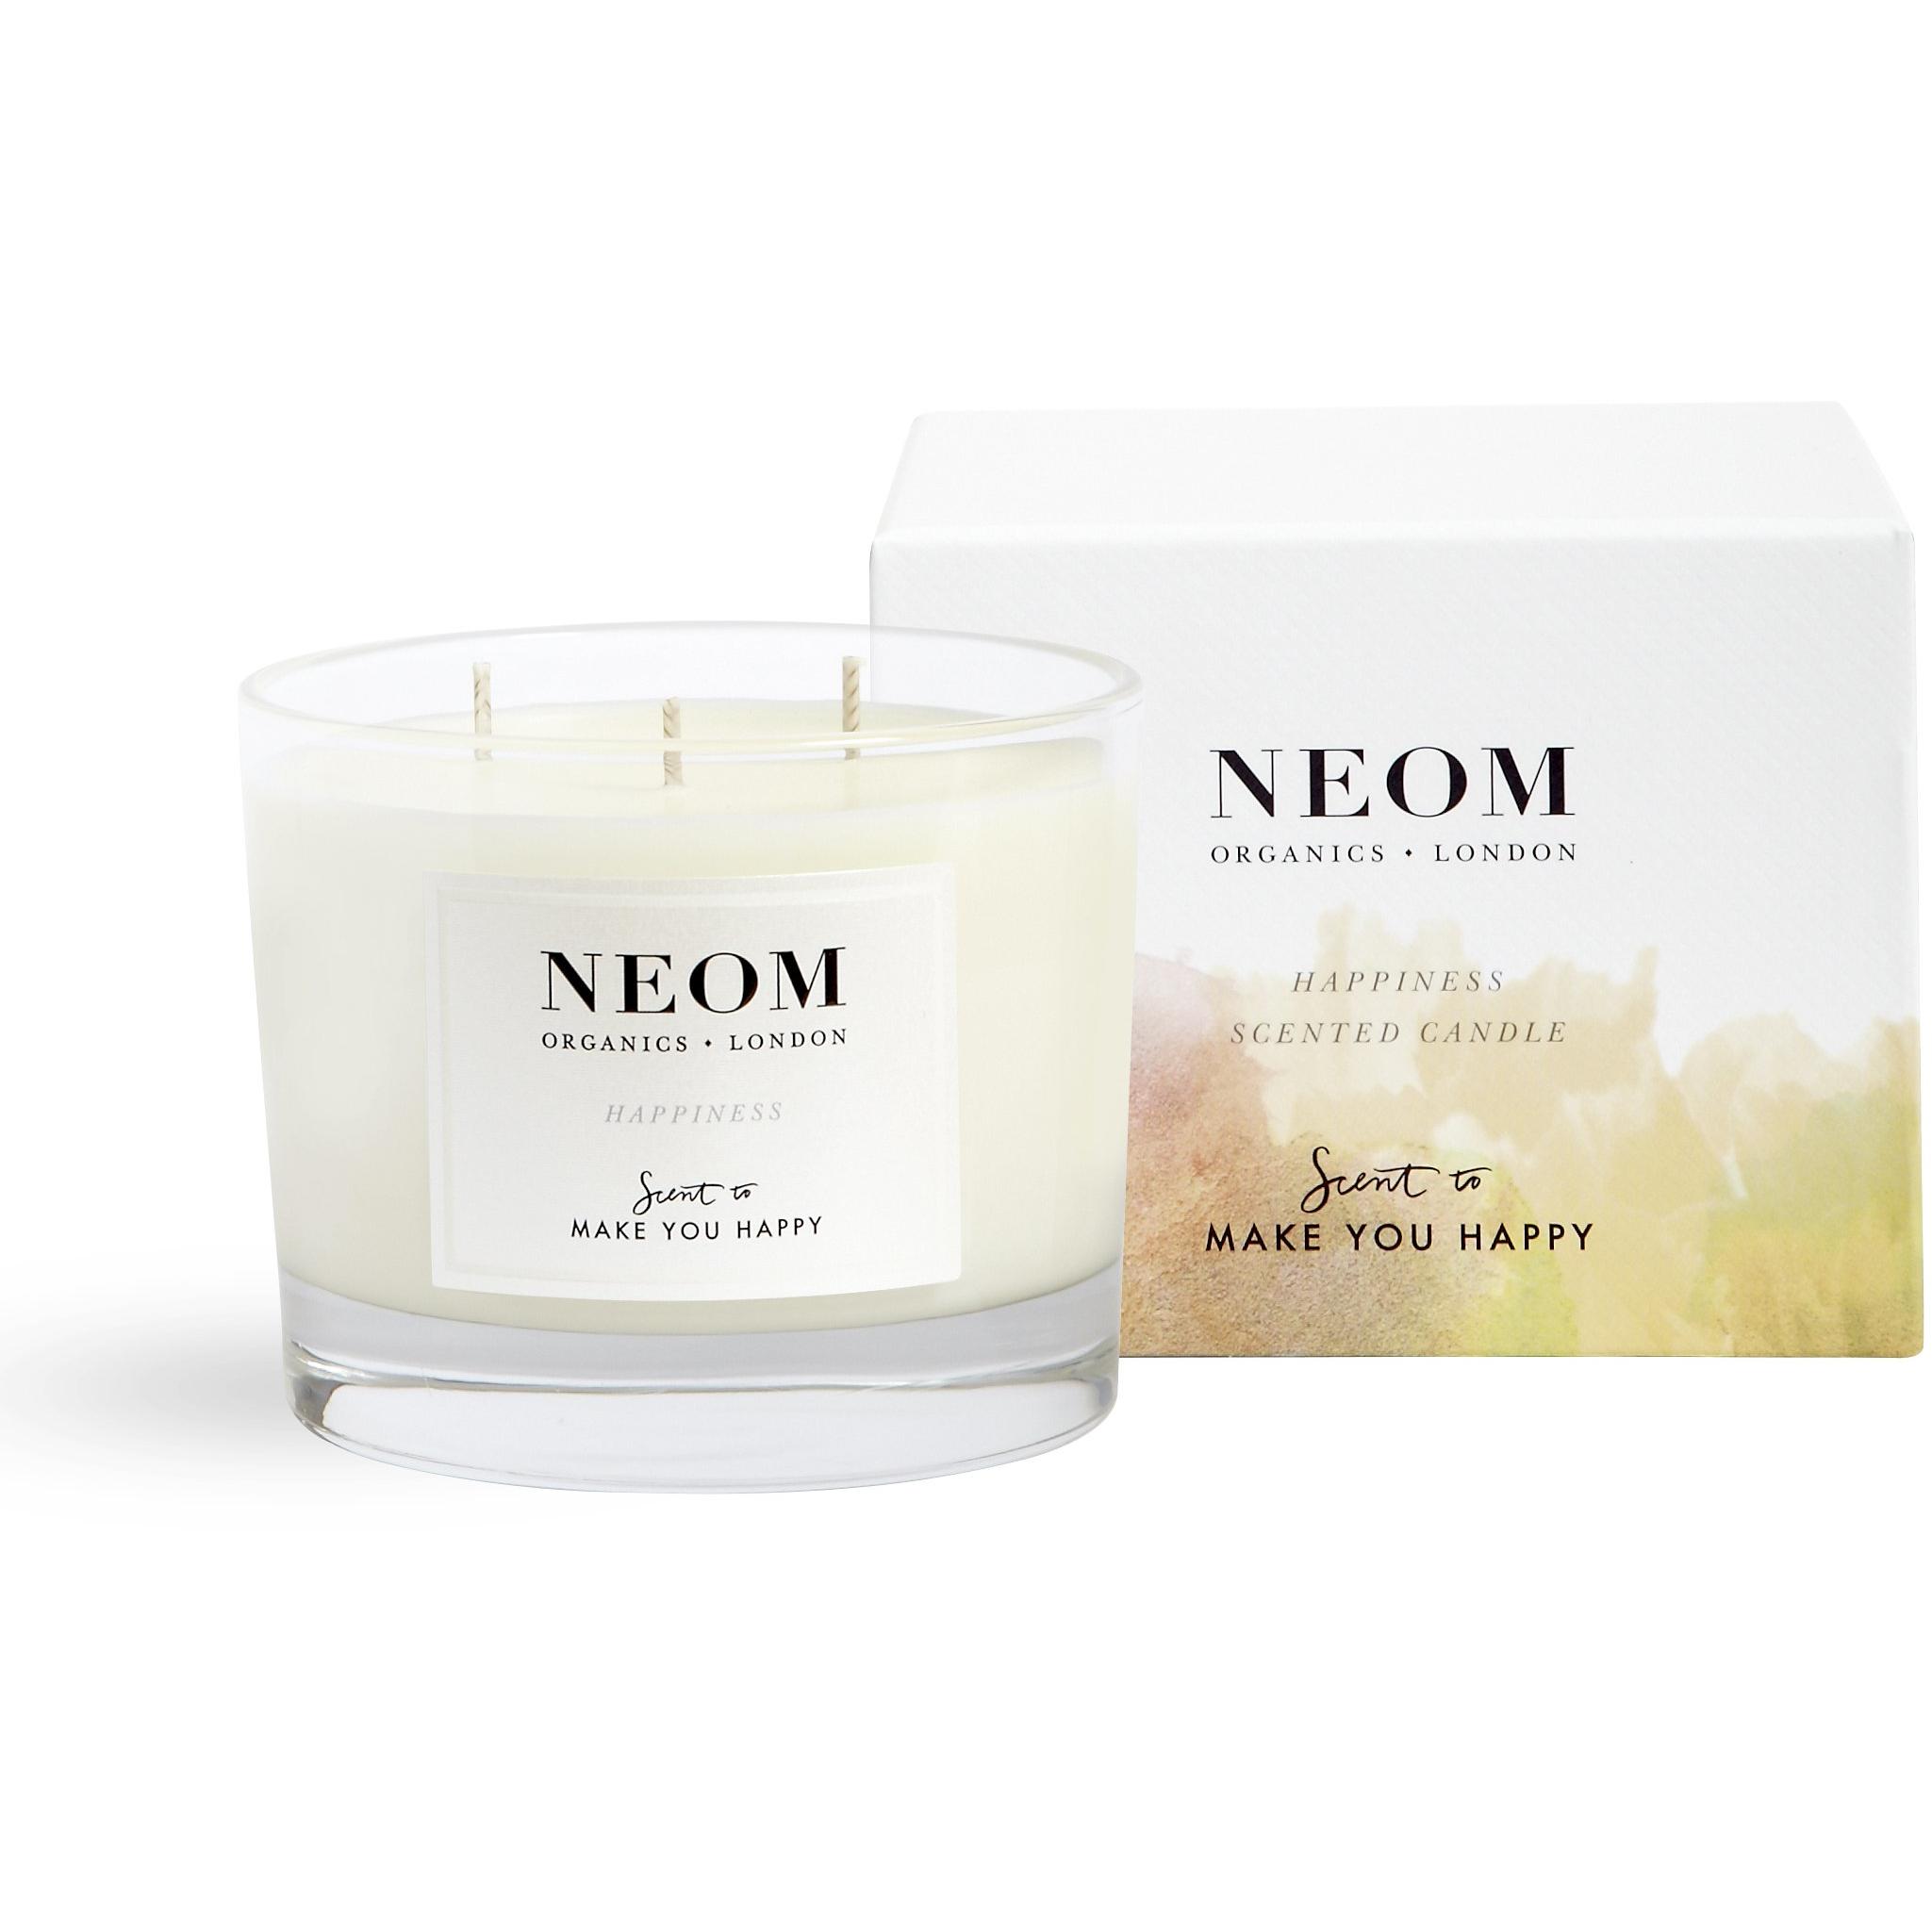 Neom Organics - Happiness Scented Candle (3 Wick) - Kate's Kitchen